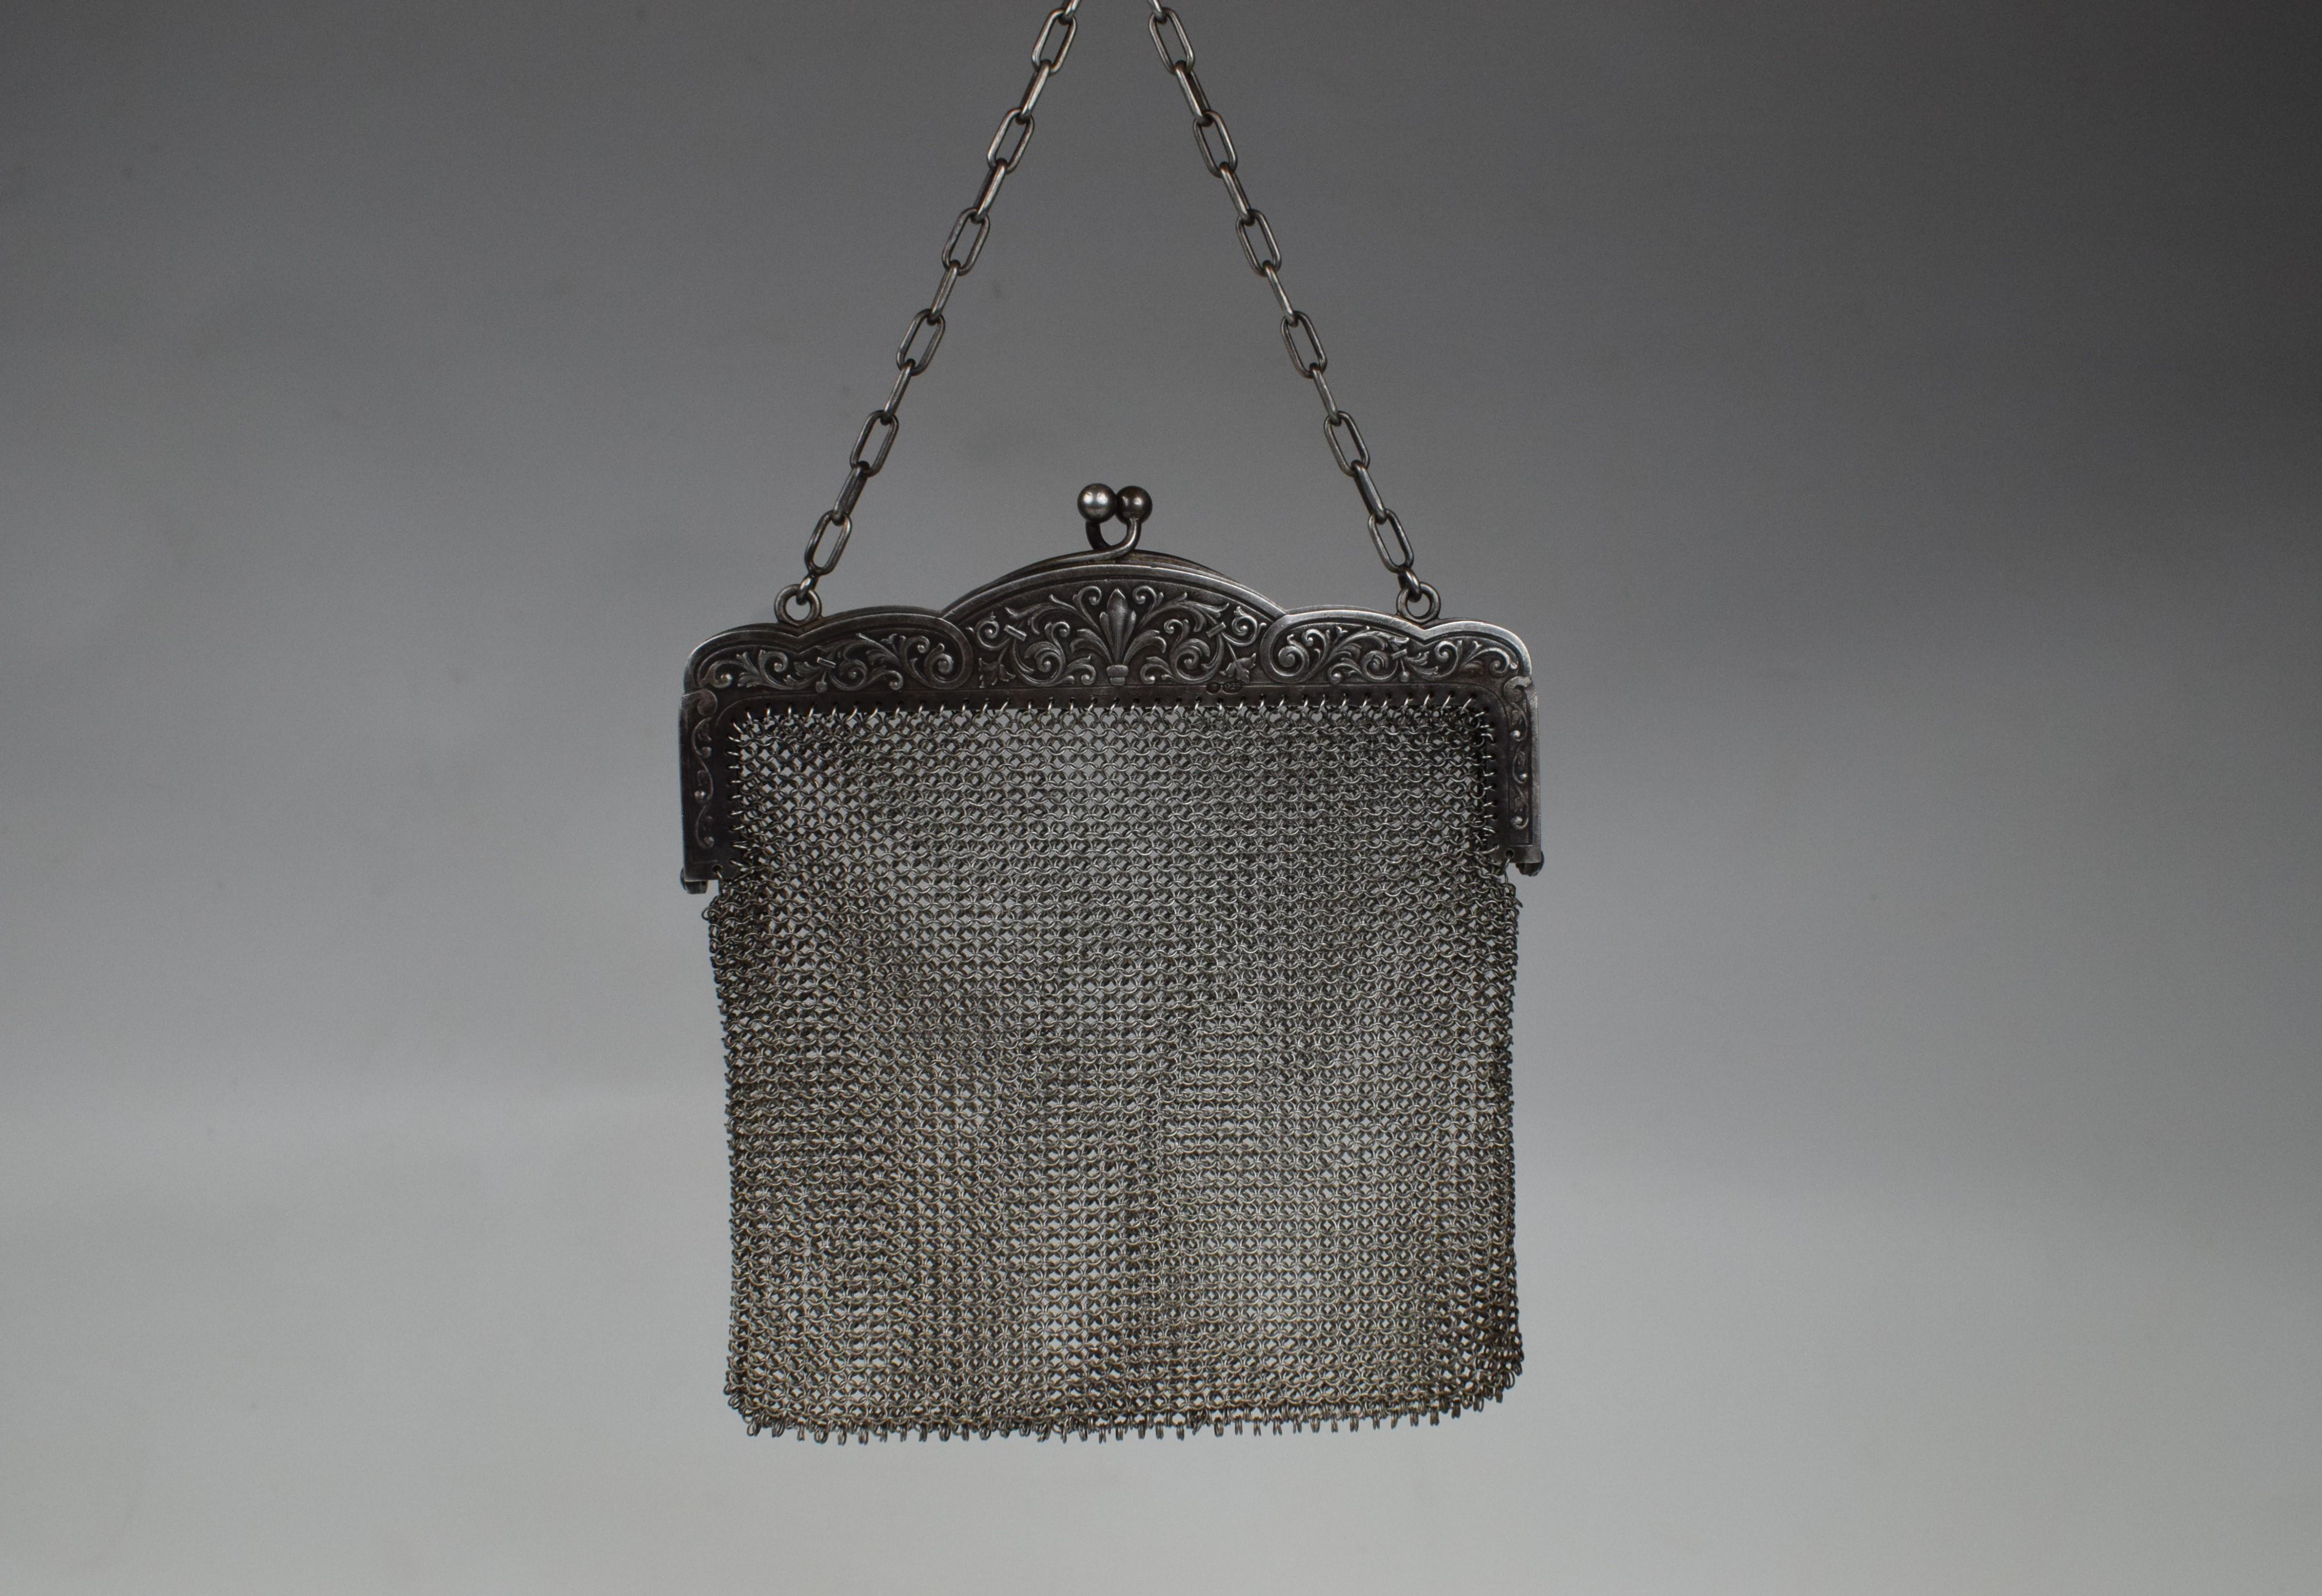 The silver chainmail purse is a stunning and luxurious accessory that embodies the opulence and craftsmanship of the era. This purse is a fine example of the Victorian obsession with intricate details and the use of precious materials.
The purse is